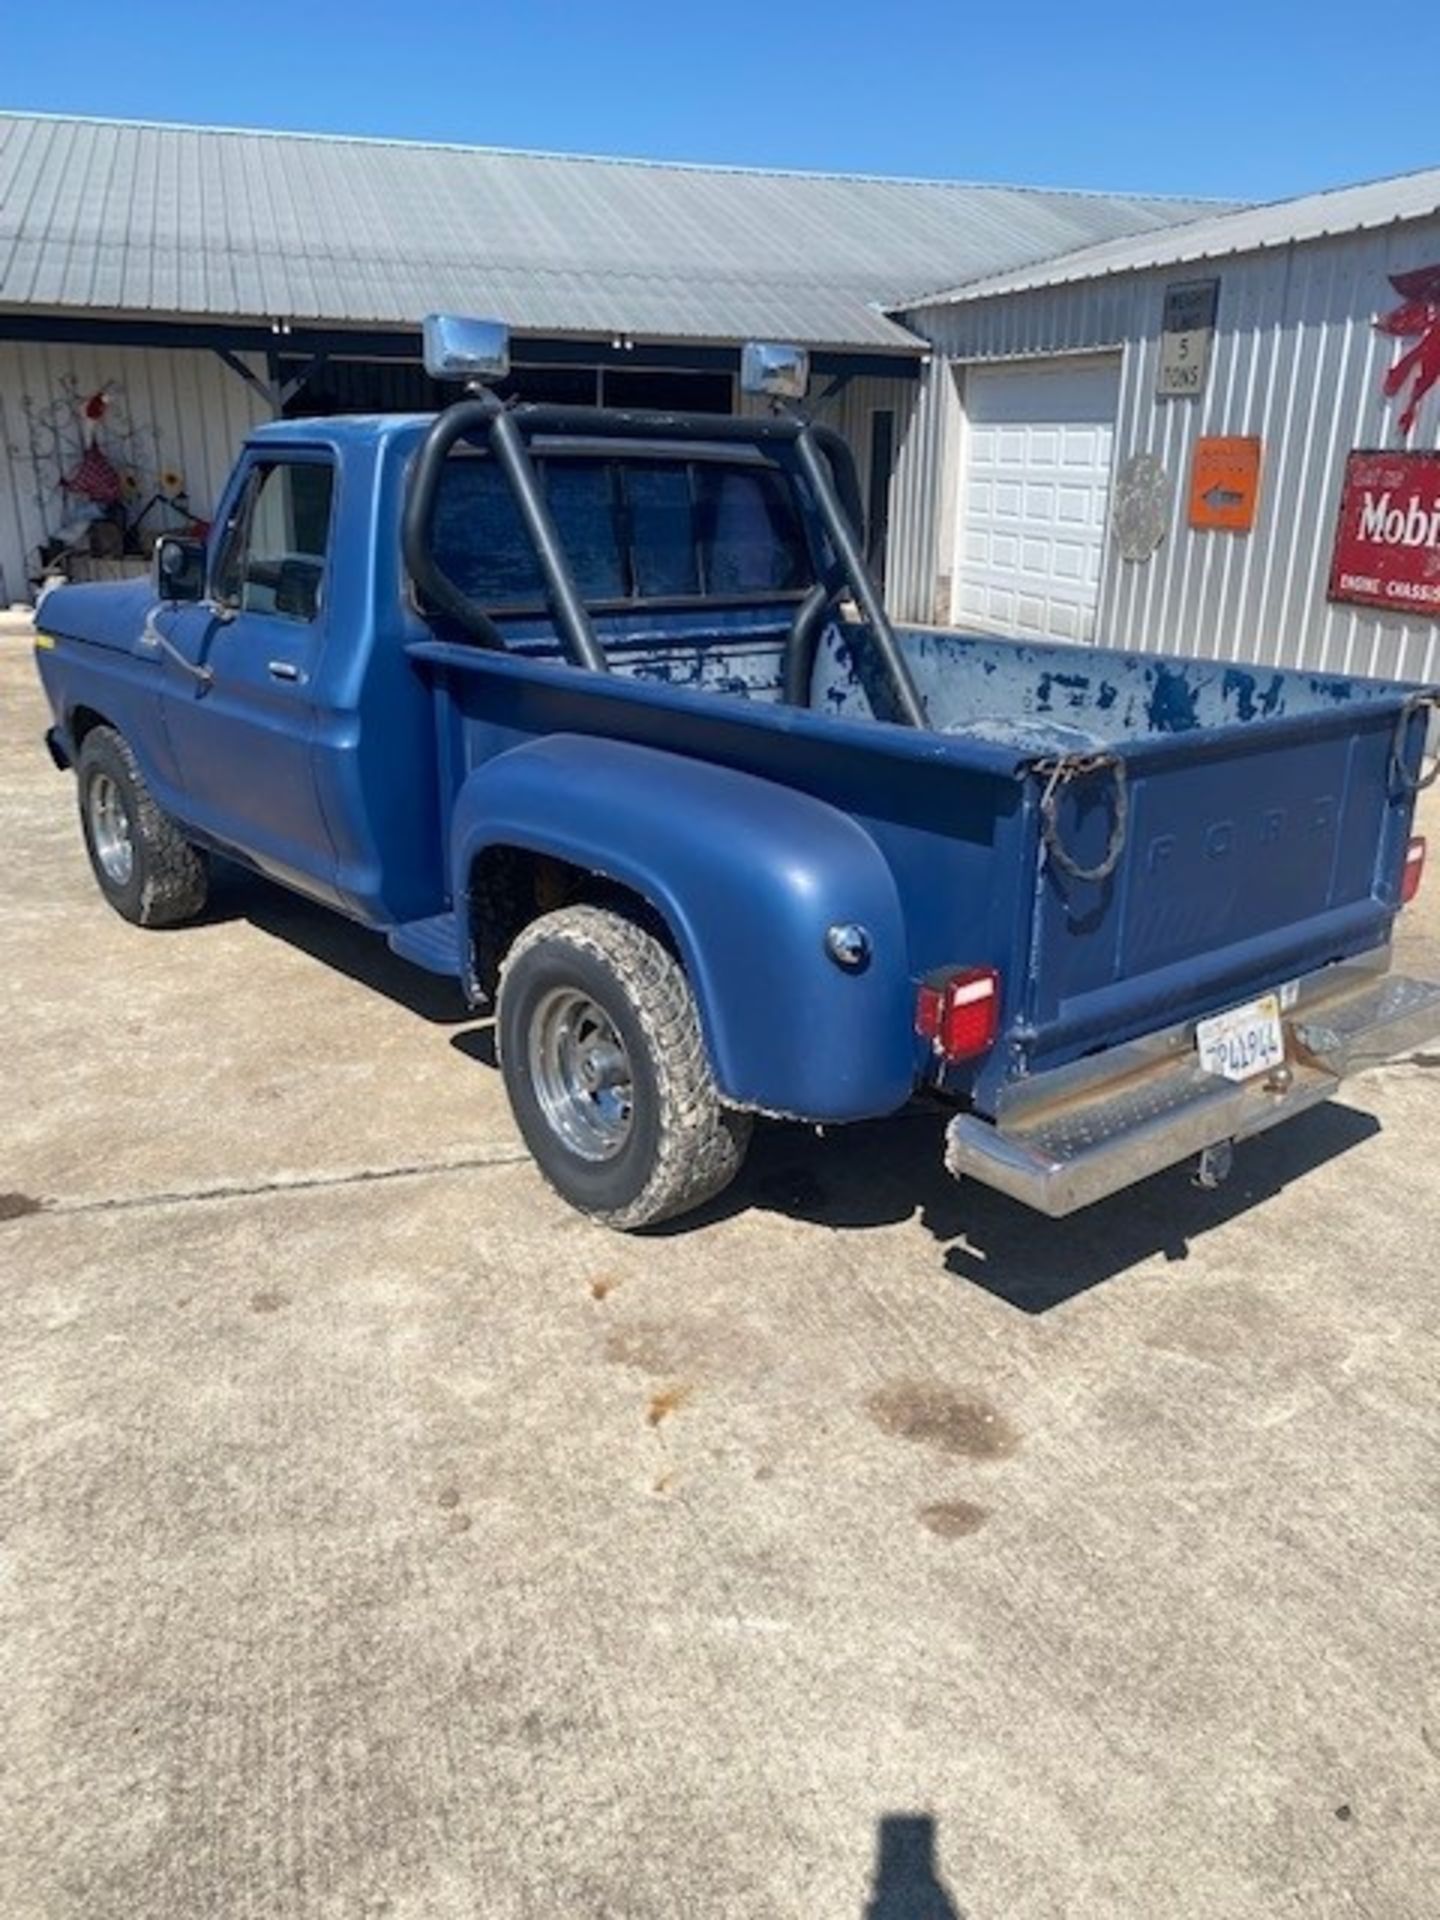 1977 Ford F150 Pickup - Image 6 of 20